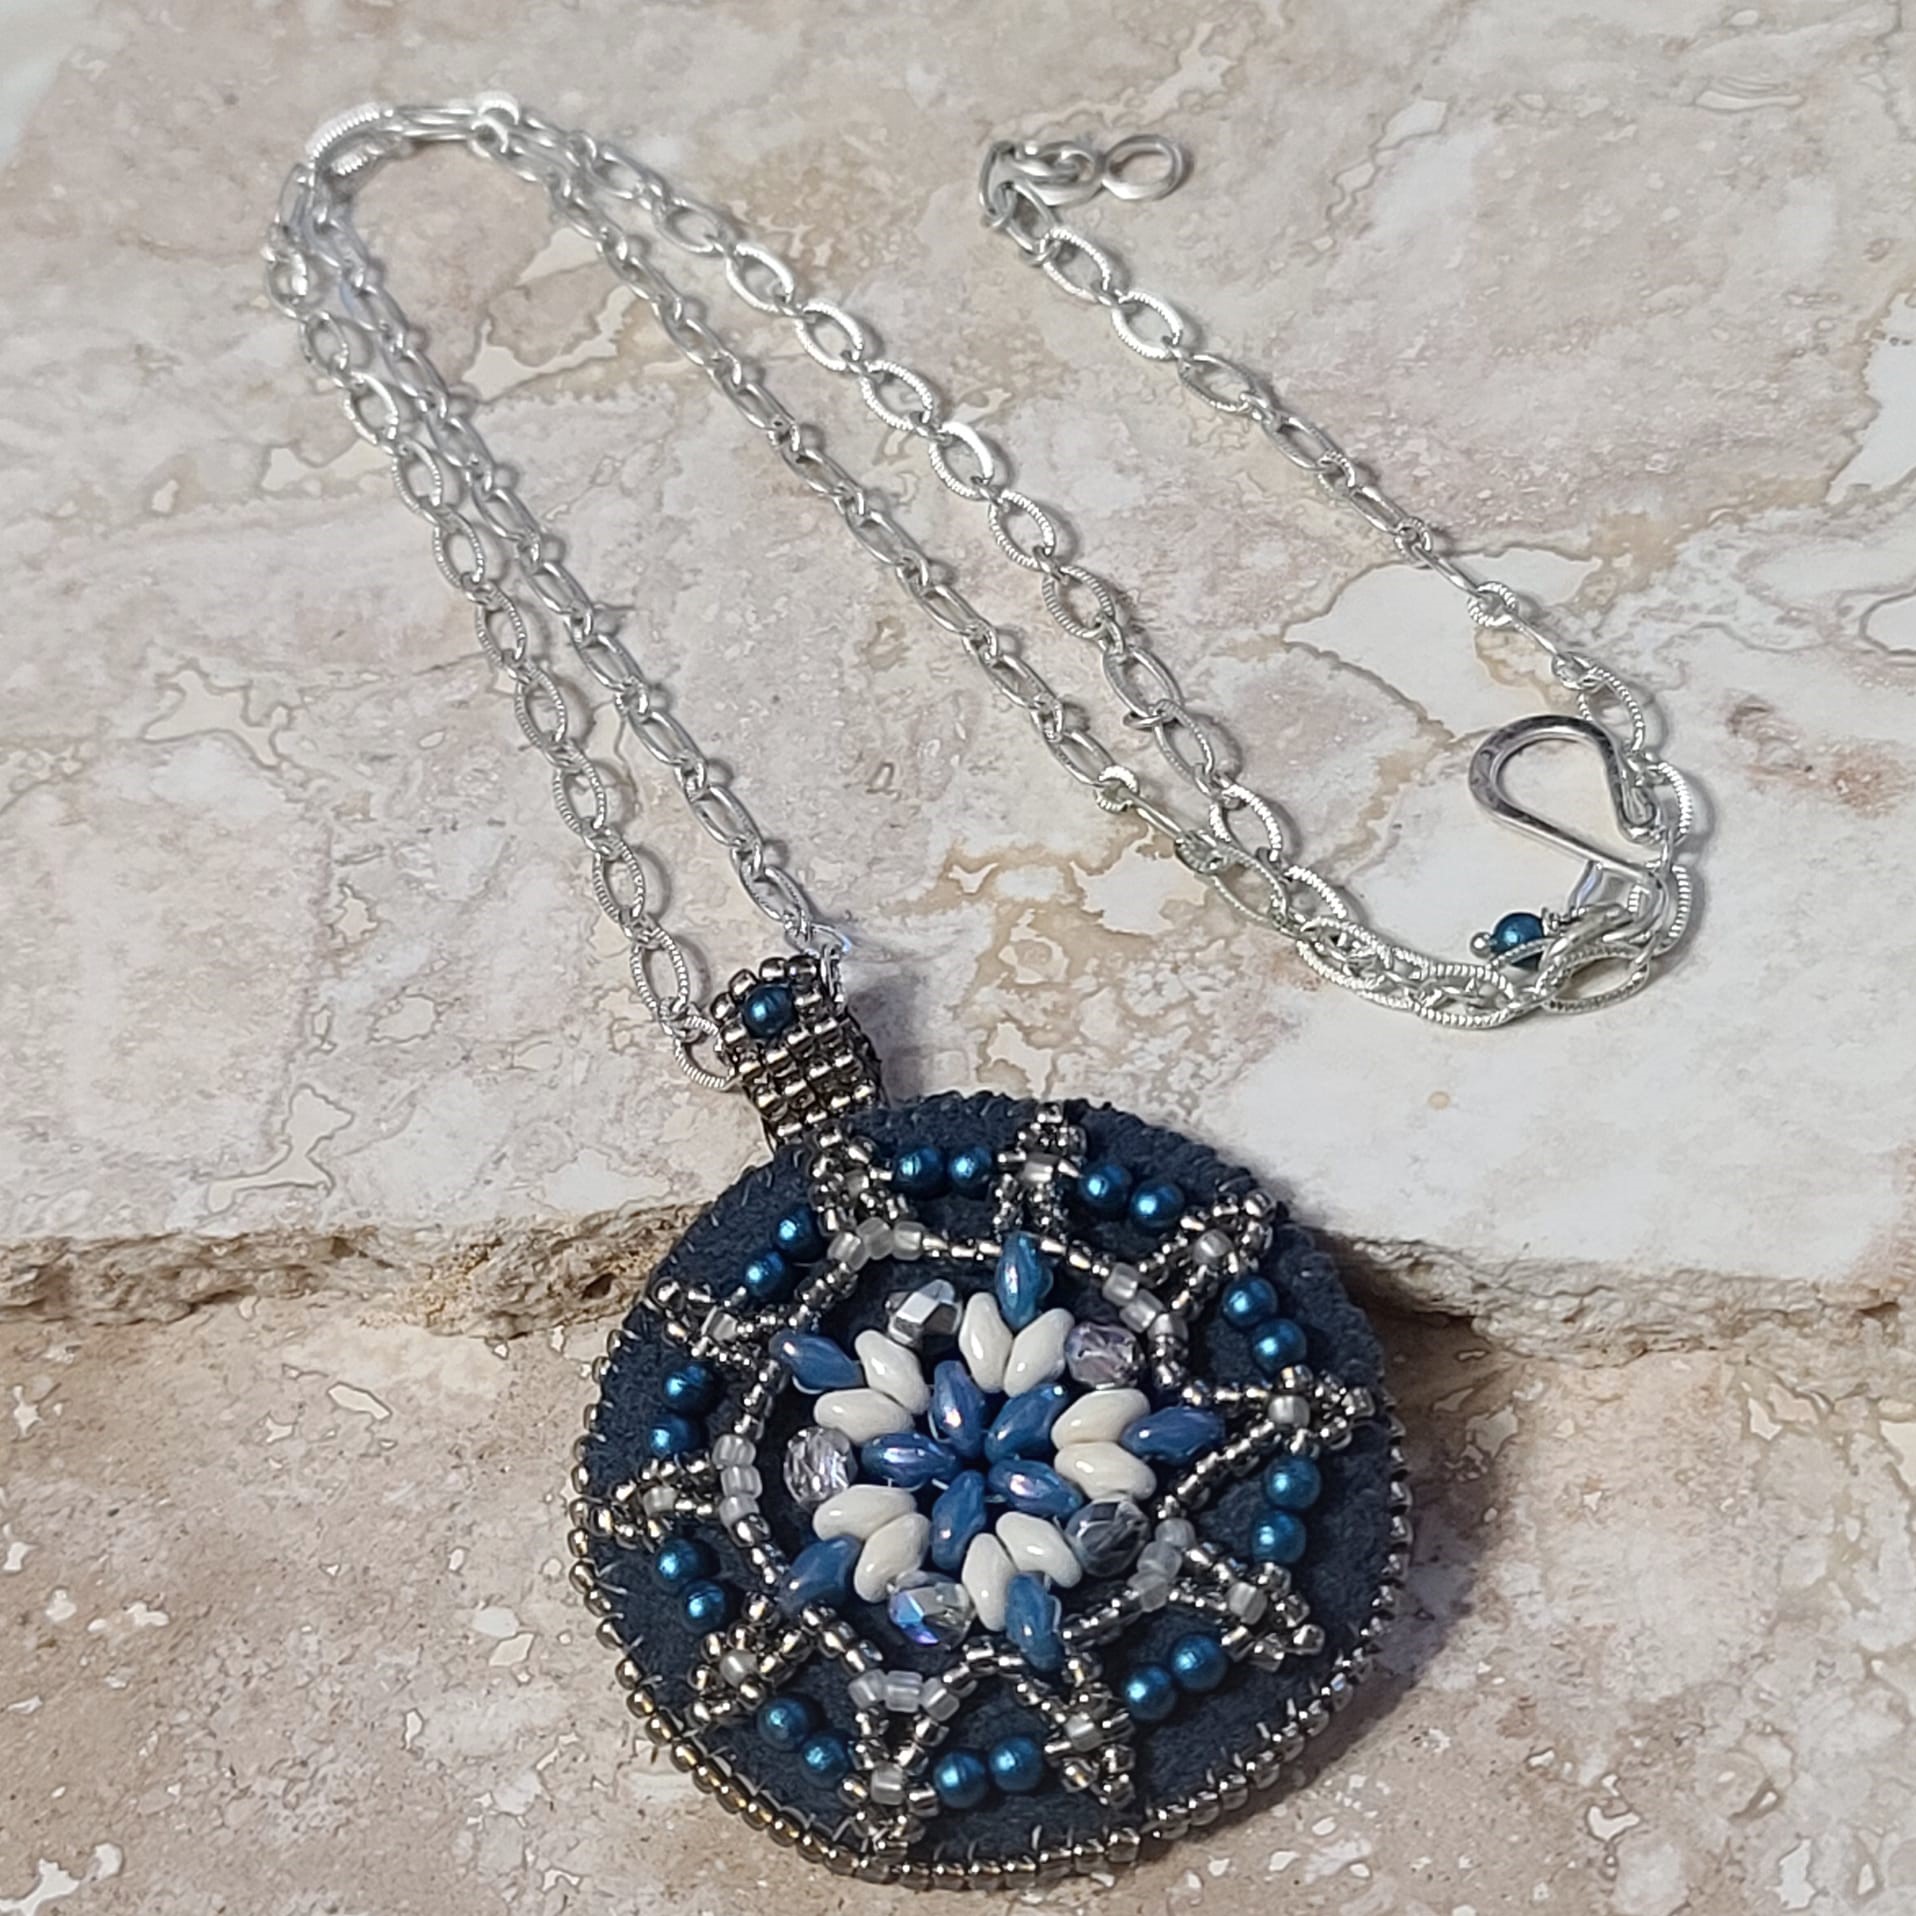 Blue suede bead embroidery medallion pendant necklace